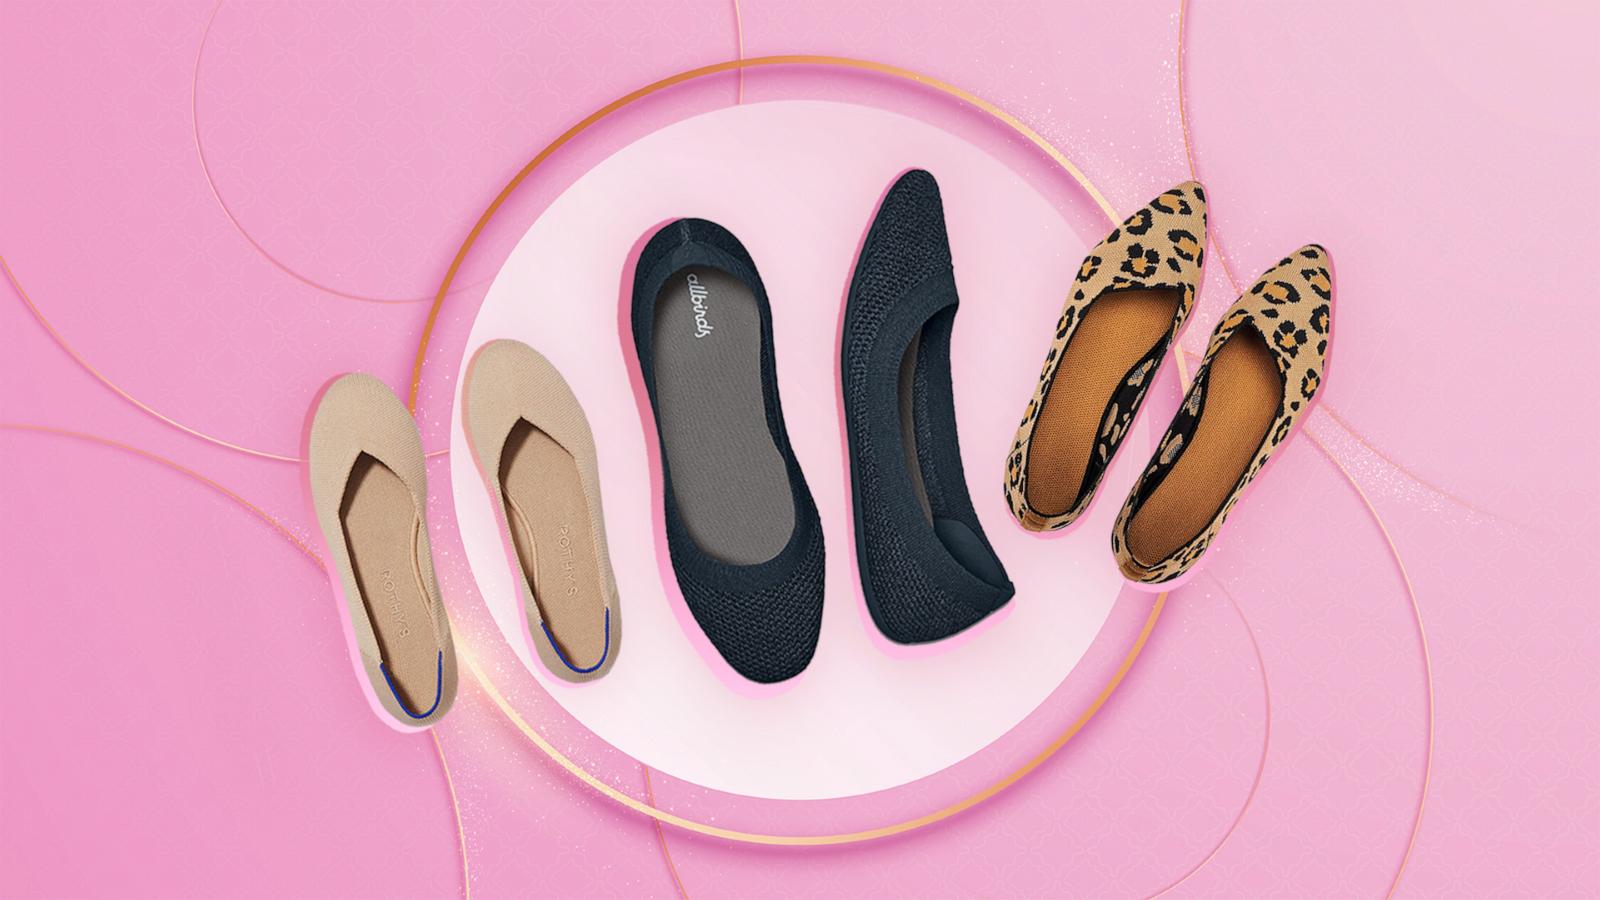 The Frank Mully Knit Flats Are a Travel Must-have